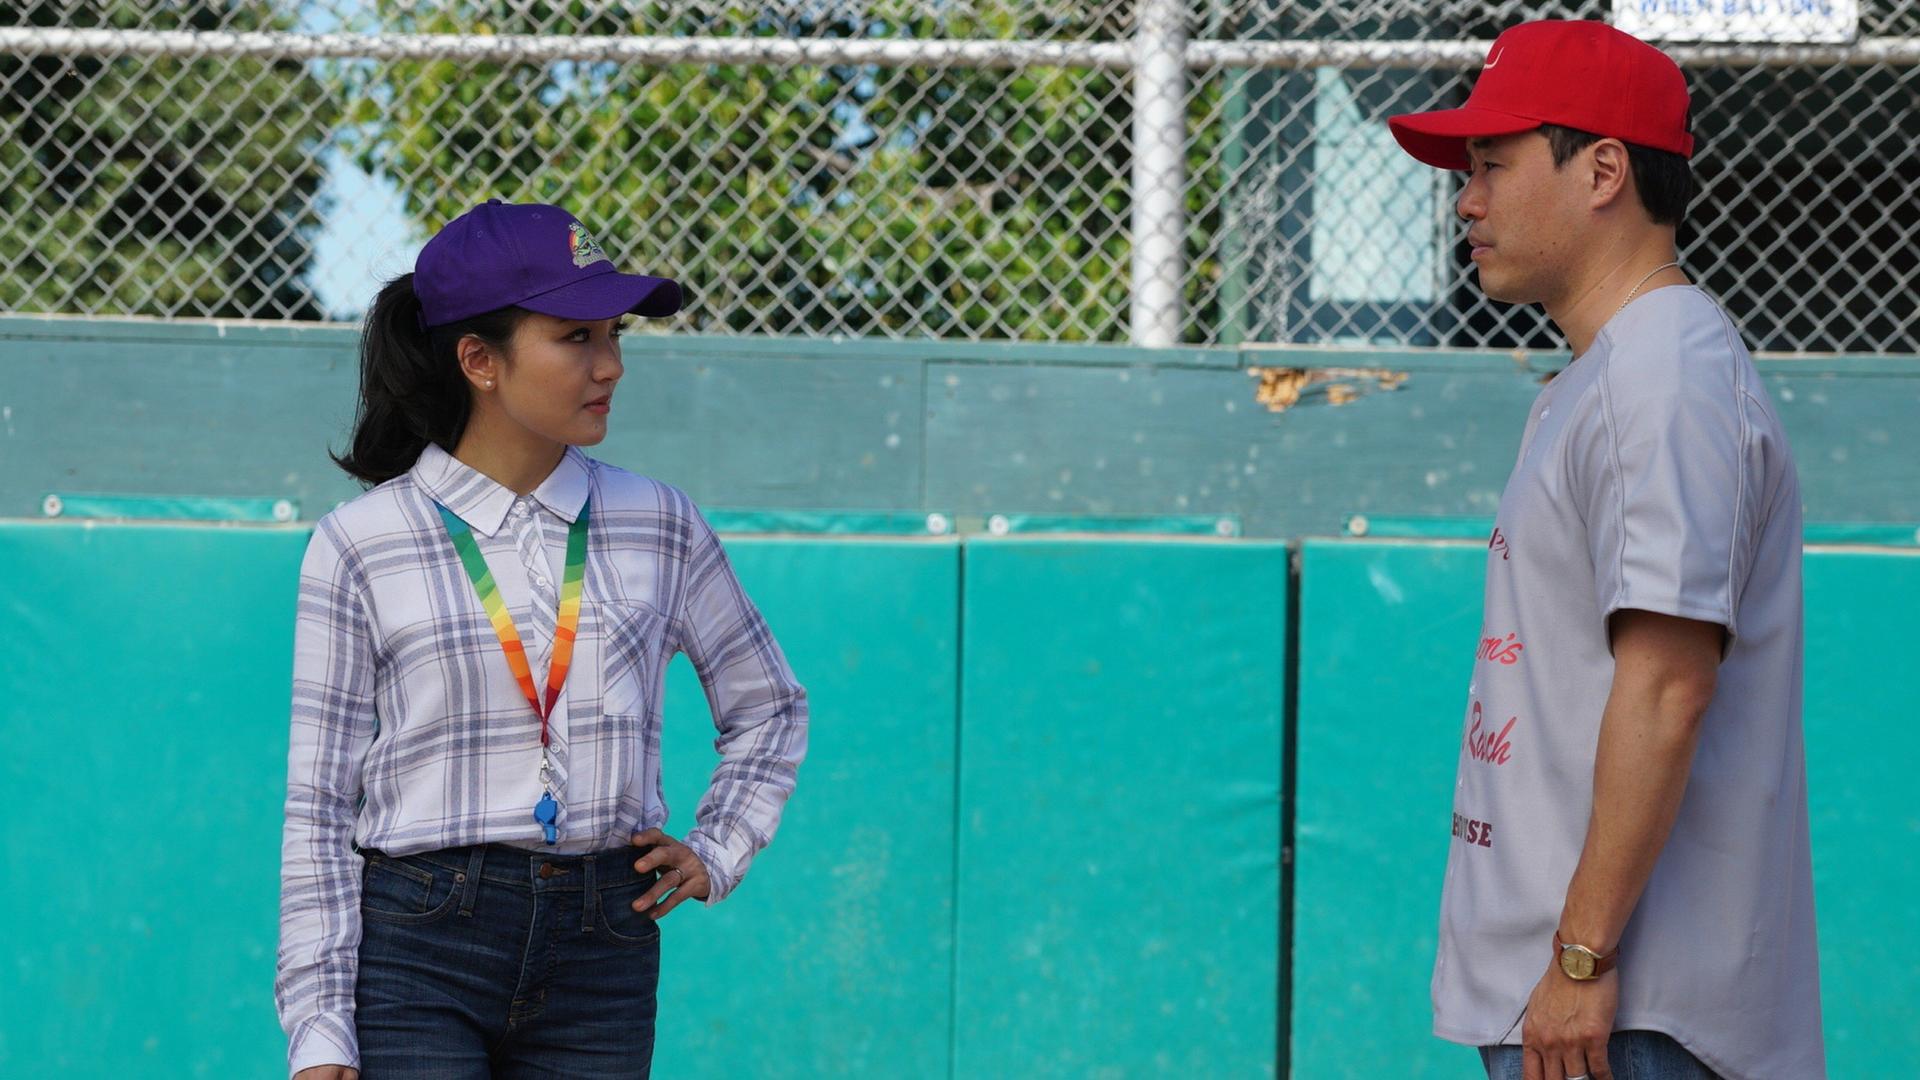 Fresh Off The Boat S04e06 A League Of Her Own Summary Season 4 Episode 6 Guide 